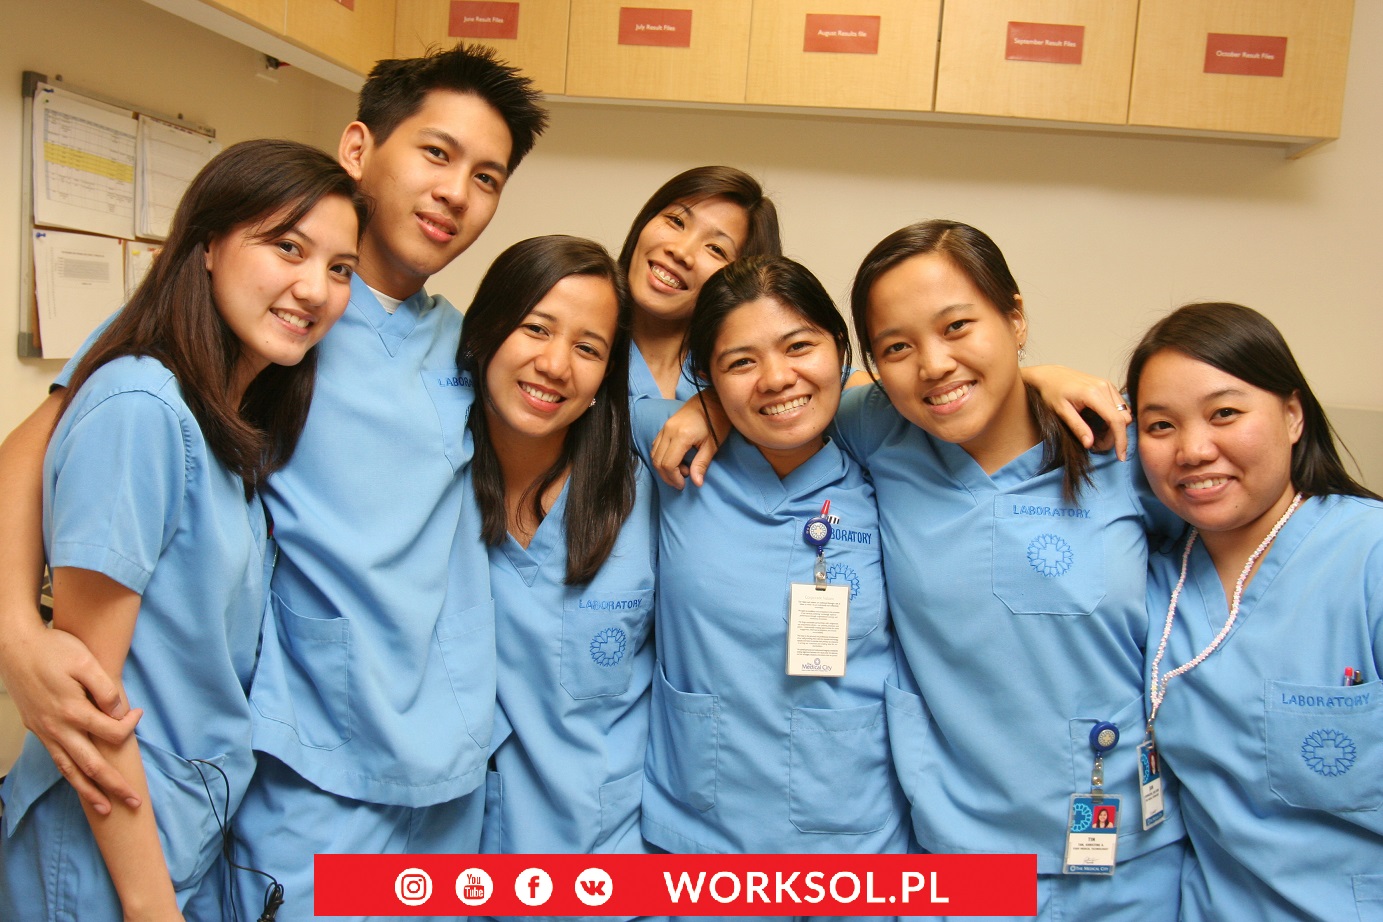 Employees from the Philippines - hard-working people